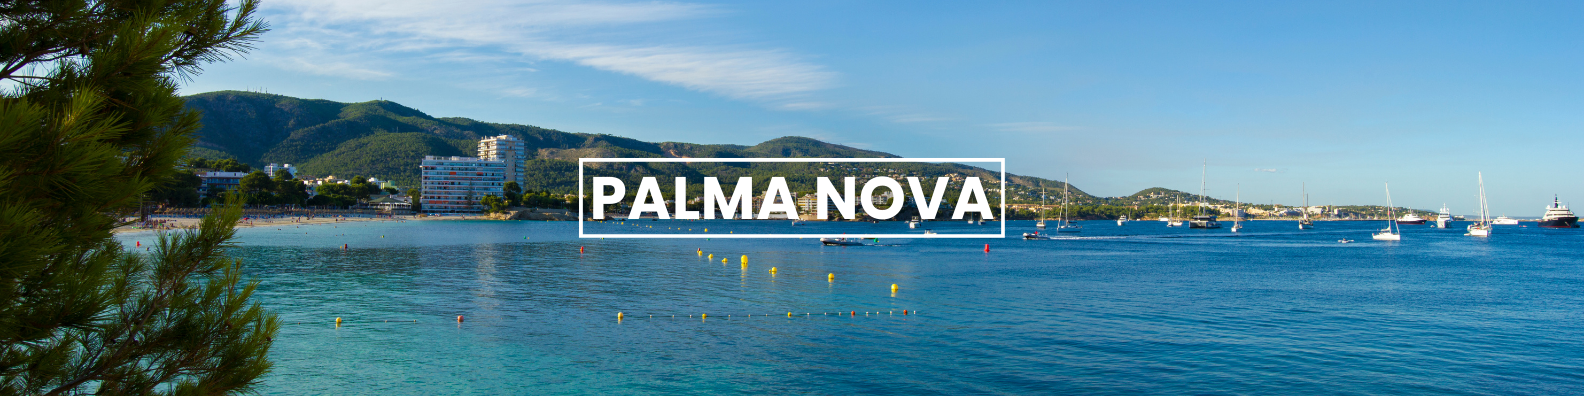 a blurred image of a body of water with the words palma nova written on it . Barter's Travelnet